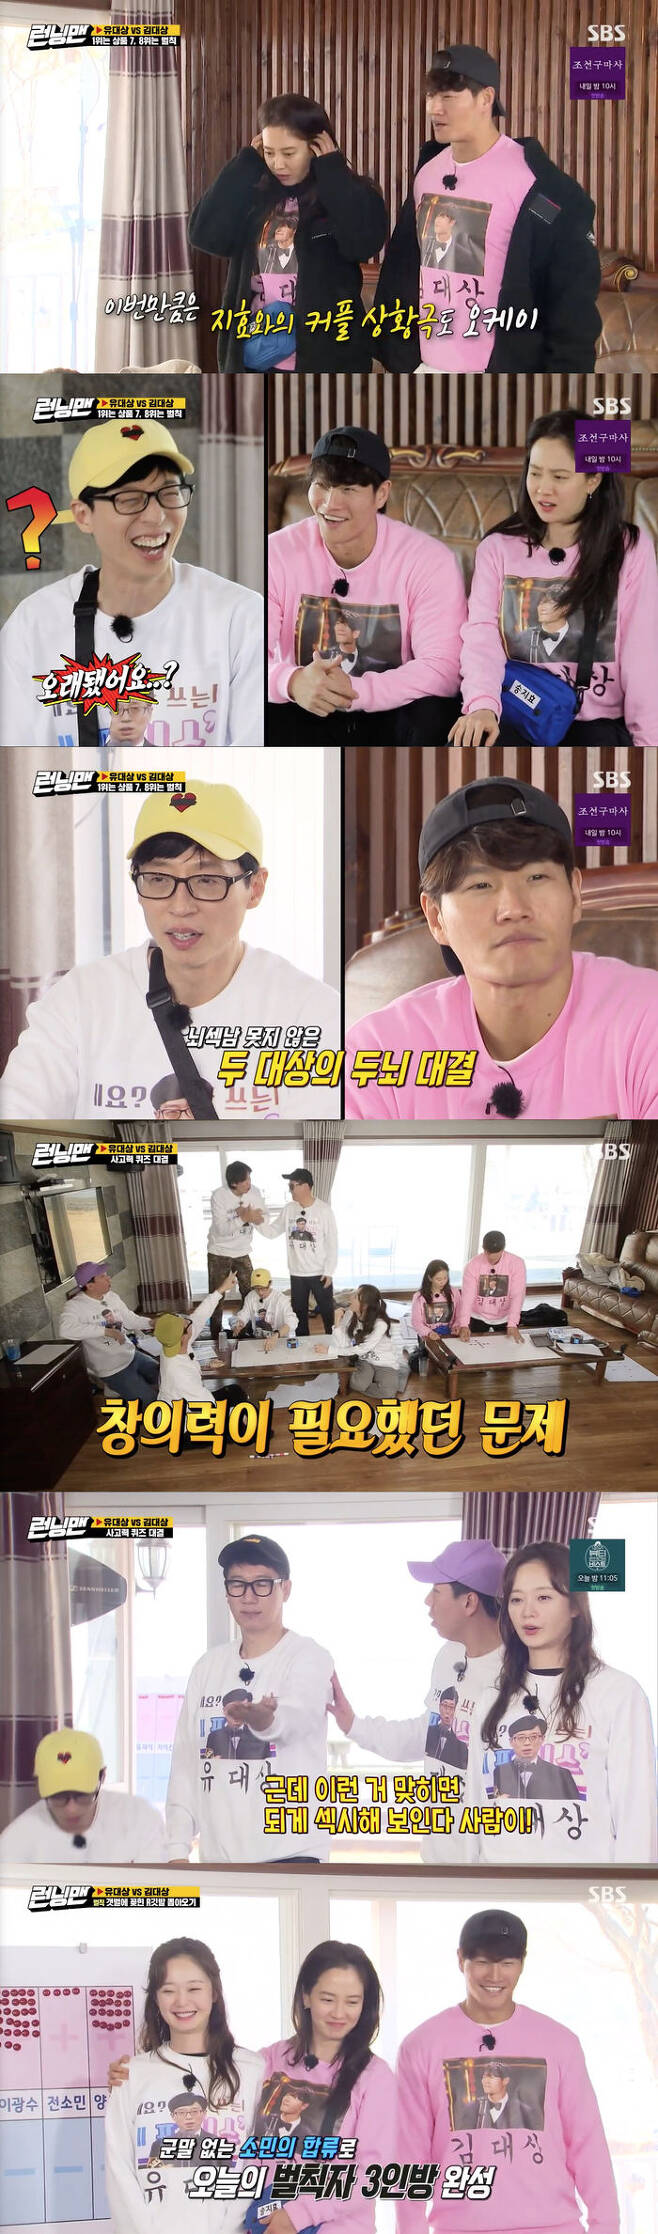 Ji Suk-jin played a big part in the quiz showdown.On SBS Running Man broadcasted on the 21st, class of the object race was held.Before the final mission on the day, the members joined the Yoo Jae-Suk team except Song Ji-hyo.Kim Jong-kook could not bear the anger of the members who did not choose him.Kim Jong-kook, who wrote the pledge to prevent the sprain, forced a smile and even played a couple situation with Song Ji-hyo.The production team informed the last mission that it was the last mission that could be turned over the last minute.Kim Jong-kook said, Can not you just turn it over?The last mission was a mission to identify the intellectual abilities of two objects as well as brain-sex, and a quiz showdown that required thinking and creativity.From the first issue, Yoo Jae-Suk confidently shouted the right answer - but he didnt get the right answer.But at this time, Ji Suk-jin easily hit the right answer and surprised everyone.In particular, Lee Kwang-soo, Yang Se-chan, and Haha did not understand the problem even though they answered Ji Suk-jins correct answer.Why is it so soon?The next problem was also right at the same time that Ji Suk-jin started. In the solo of Ji Suk-jin, the other members came up with problems to write their heads.Its so daze, its dizzying, she said, complaining of pain.The third problem was also immediately answered by Ji Suk-jin.Almost close to the correct answer, he said he would once again tell the correct answer, and in this process he confused his answer and said, If I do it the way I do it, one is empty.I can not draw this. And Kim Jong-kook was right and lost his score to Kim Dae-sang.Lee Kwang-soo gave a pinch to Ji Suk-jin, who failed to score even though he hit the right answer, saying, What are you gifted, you can not get the problem?Kim Jong-kook was right for the correct answer in the next question: Judeas team looked dazed as a fool.And last problem: Ji Suk-jin got a hint when he saw Kim Jong-kook and hit it with the right answer, raising the entire Judea teams score alone.Yang Se-chan admired Ji Suk-jins quiz skills, saying, If you hit this, you look sexy. You look different, you look different.After all the commissions, Lee Kwang-soo won the final; Lee Kwang-soo, who won the Wangmug trophy as the winning prize, was excited.The crew wrote the name on the spot, saying, I did not know who would win the title, so I could not imprint it. The members celebrated Lee Kwang-soos victory.